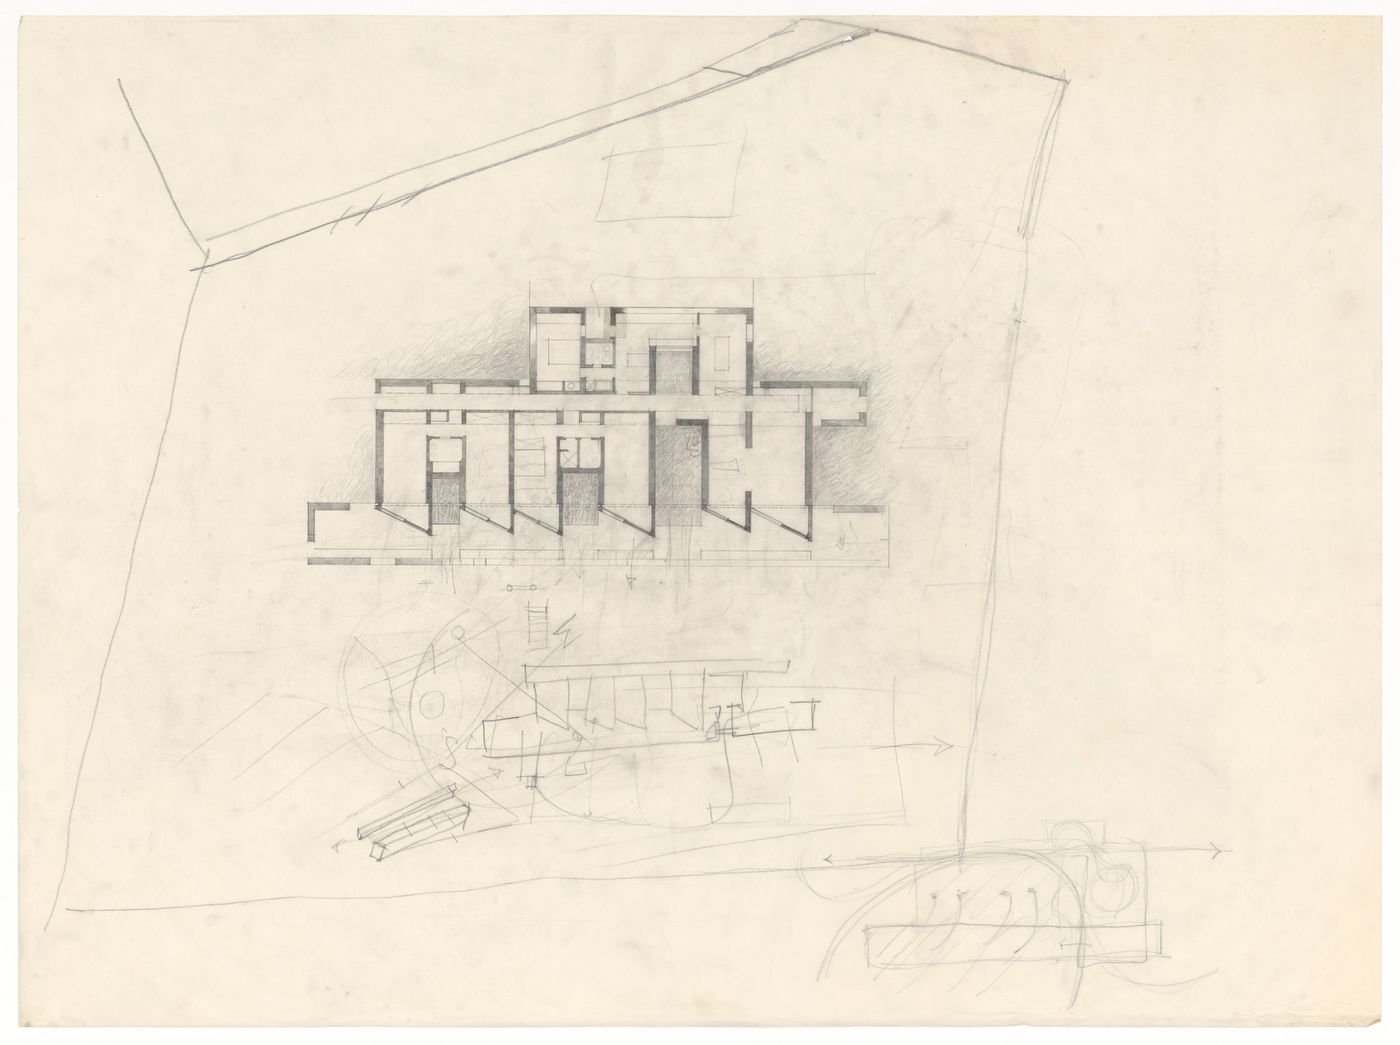 Floor plan and sketches for Case Di Palma, Stintino, Italy